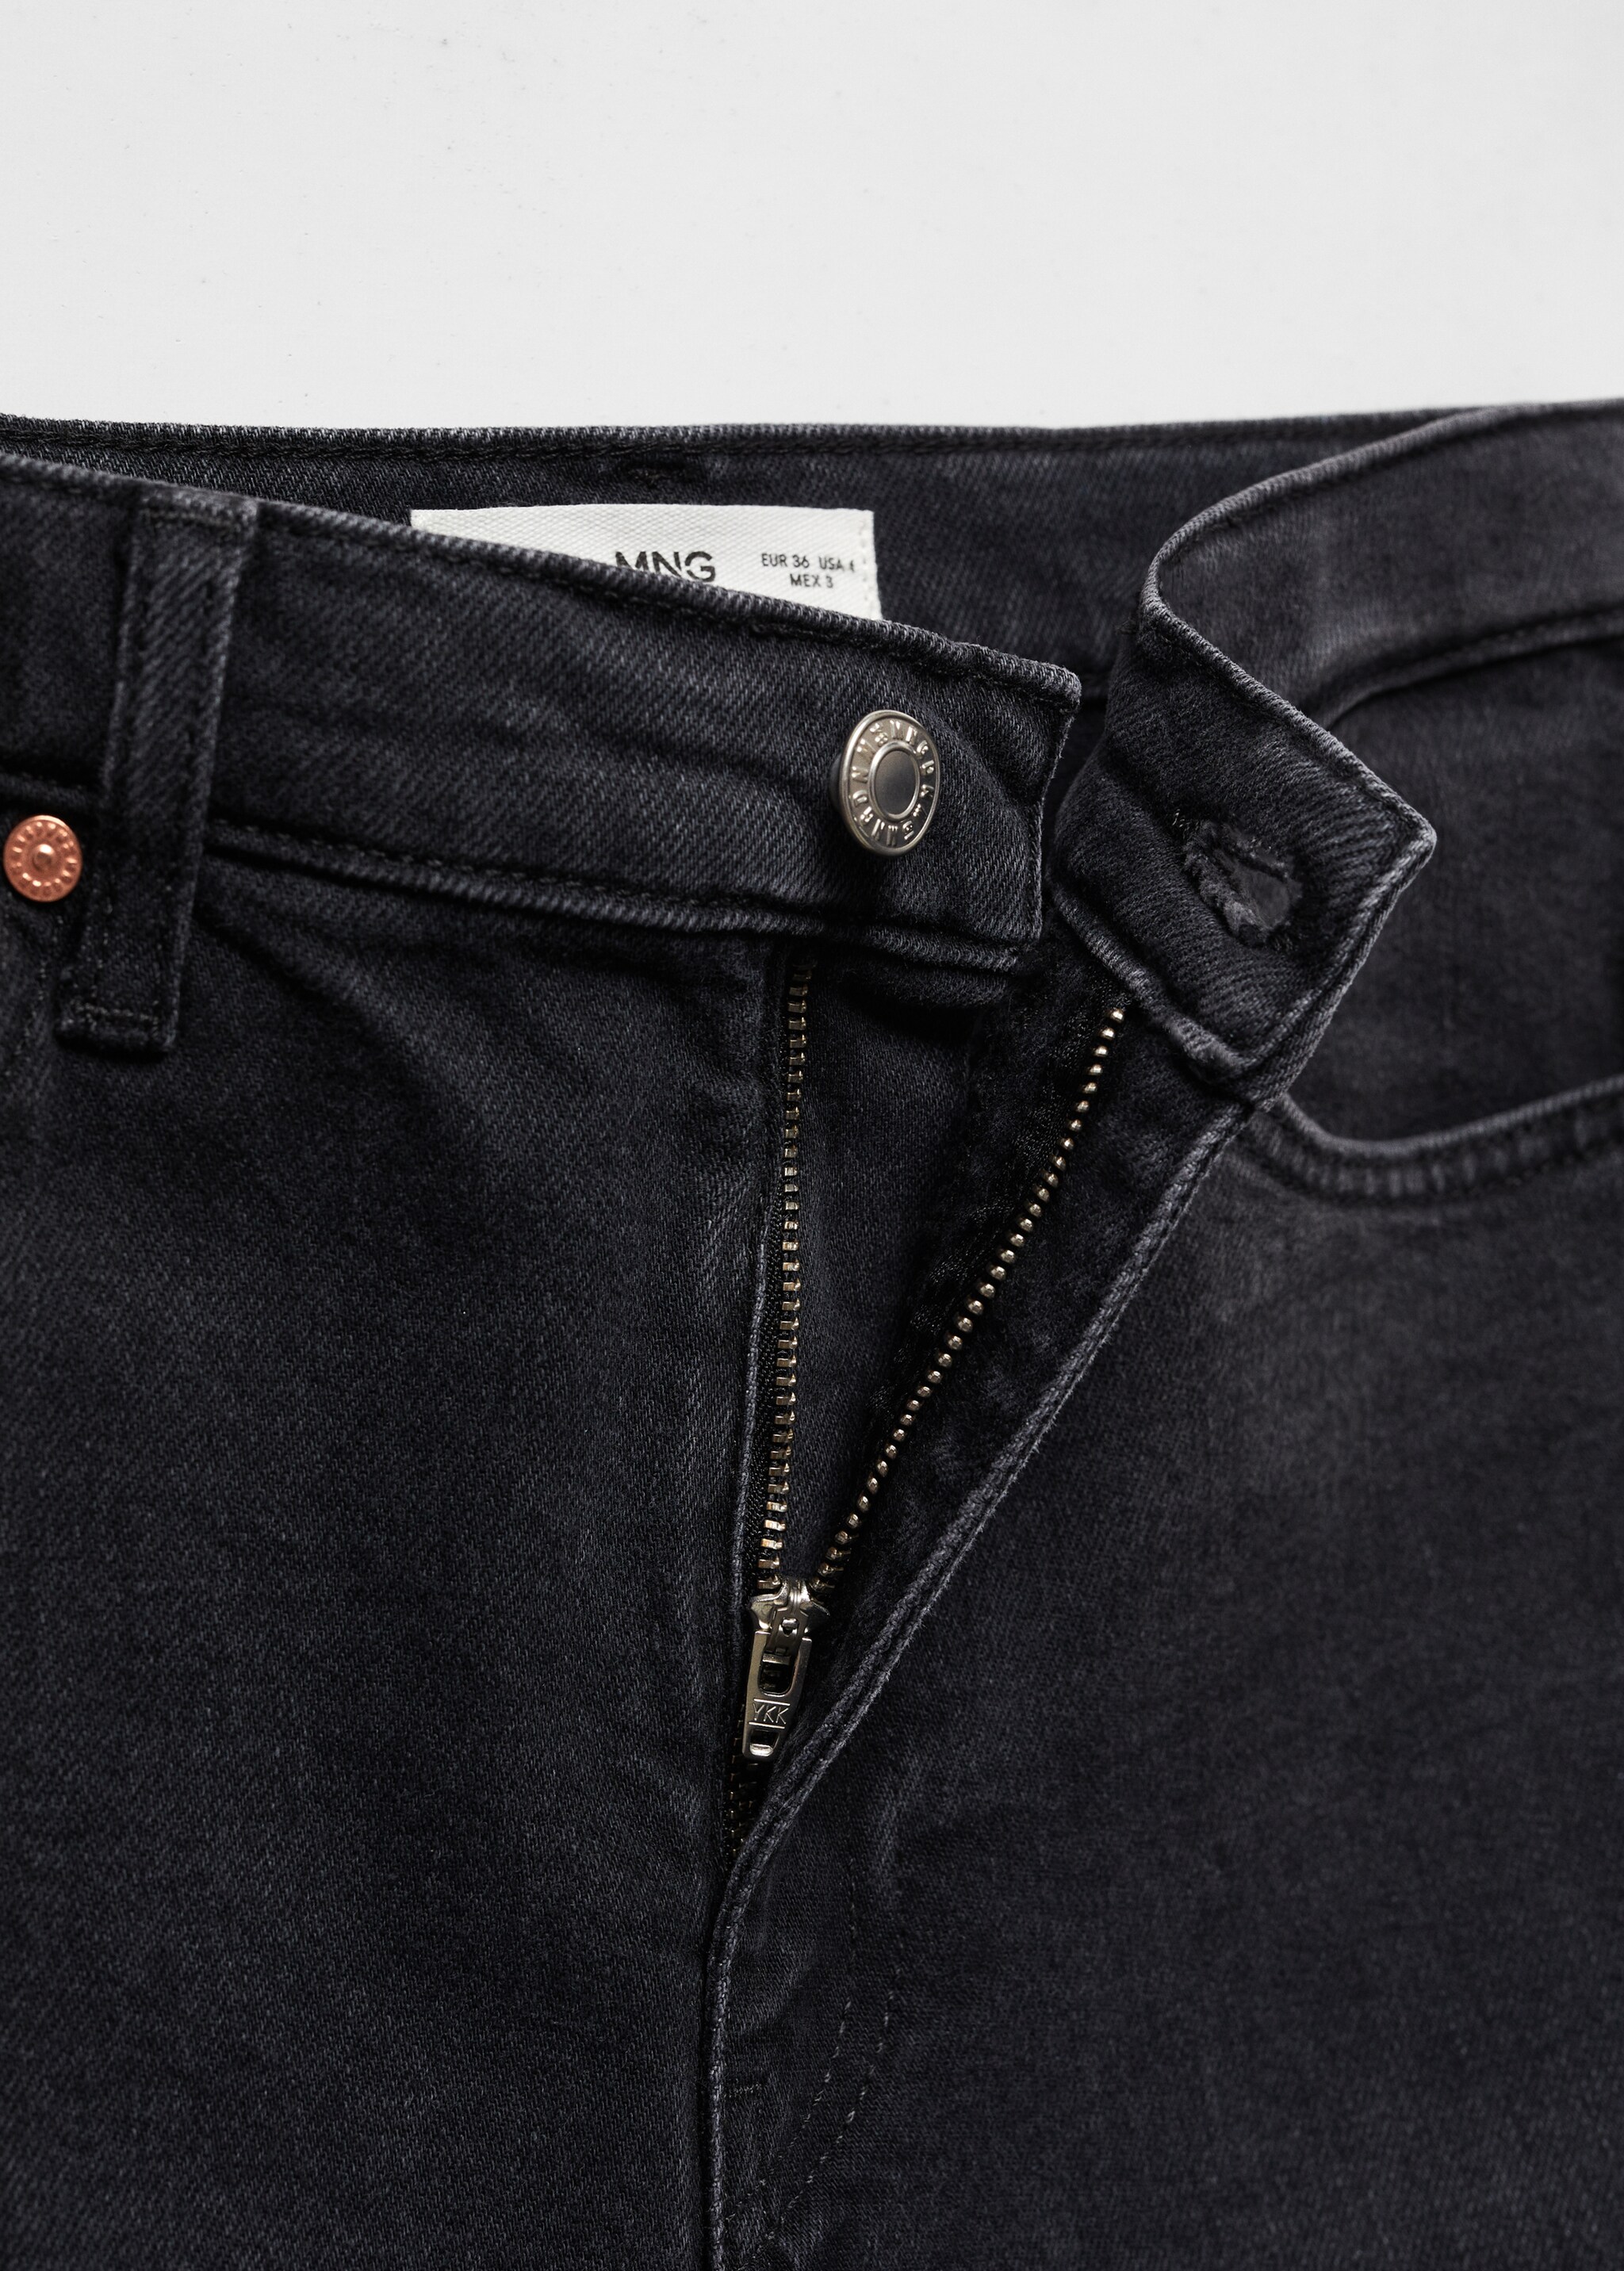 Slim cropped jeans - Details of the article 8